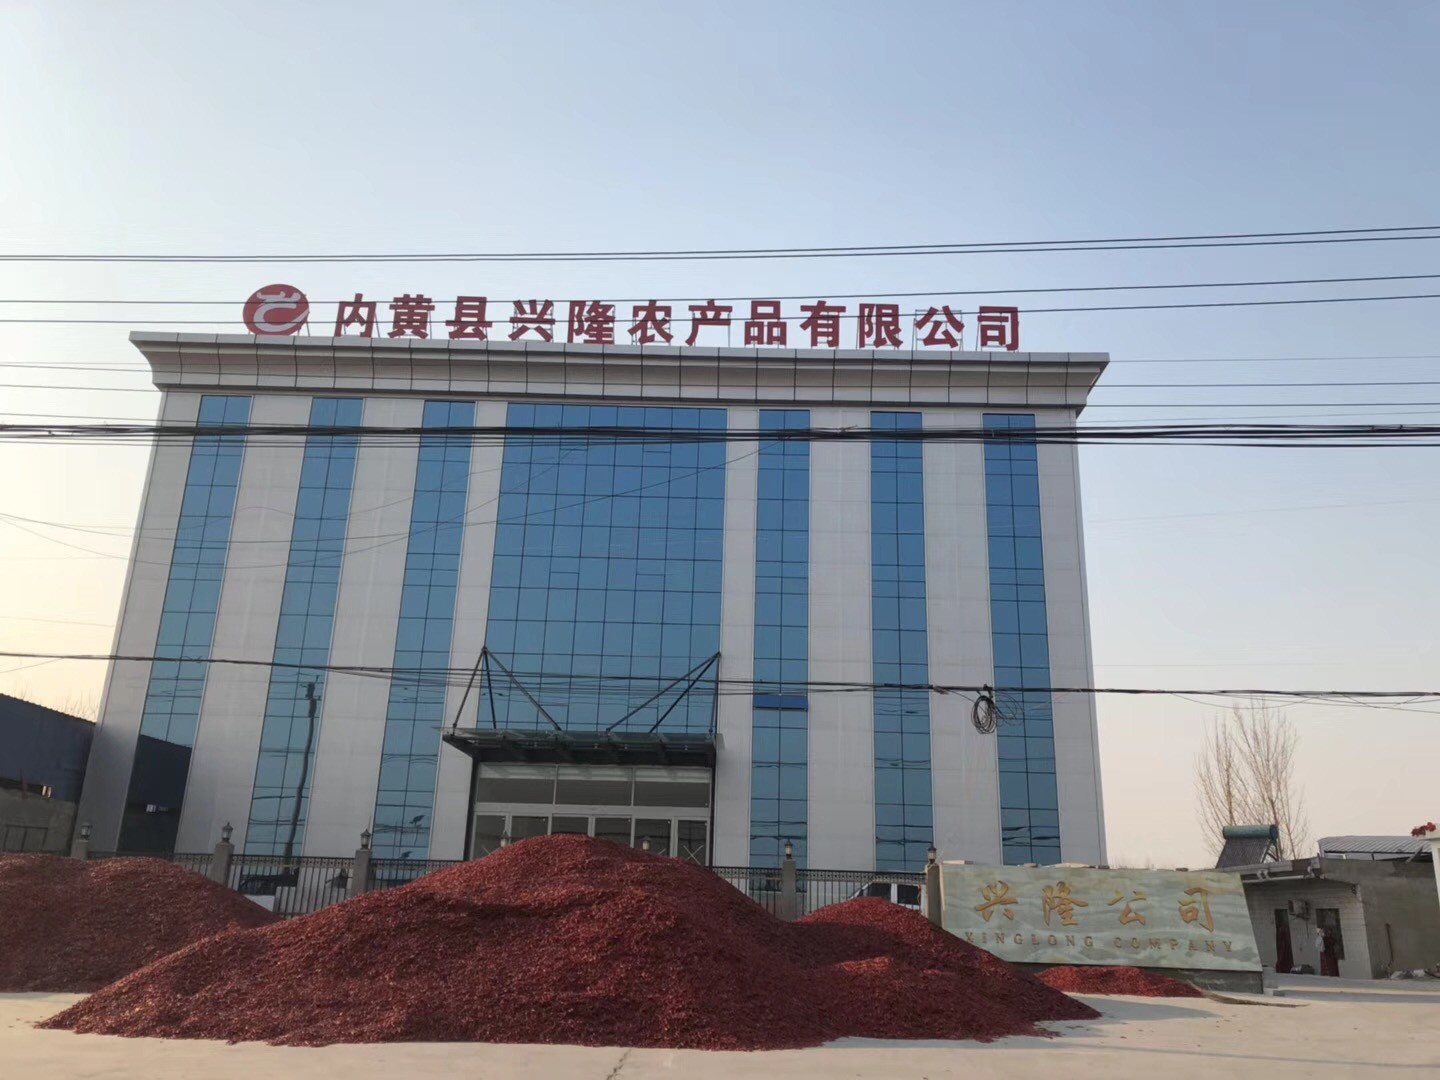 Porcelana Neihuang Xinglong Agricultural Products Co. Ltd